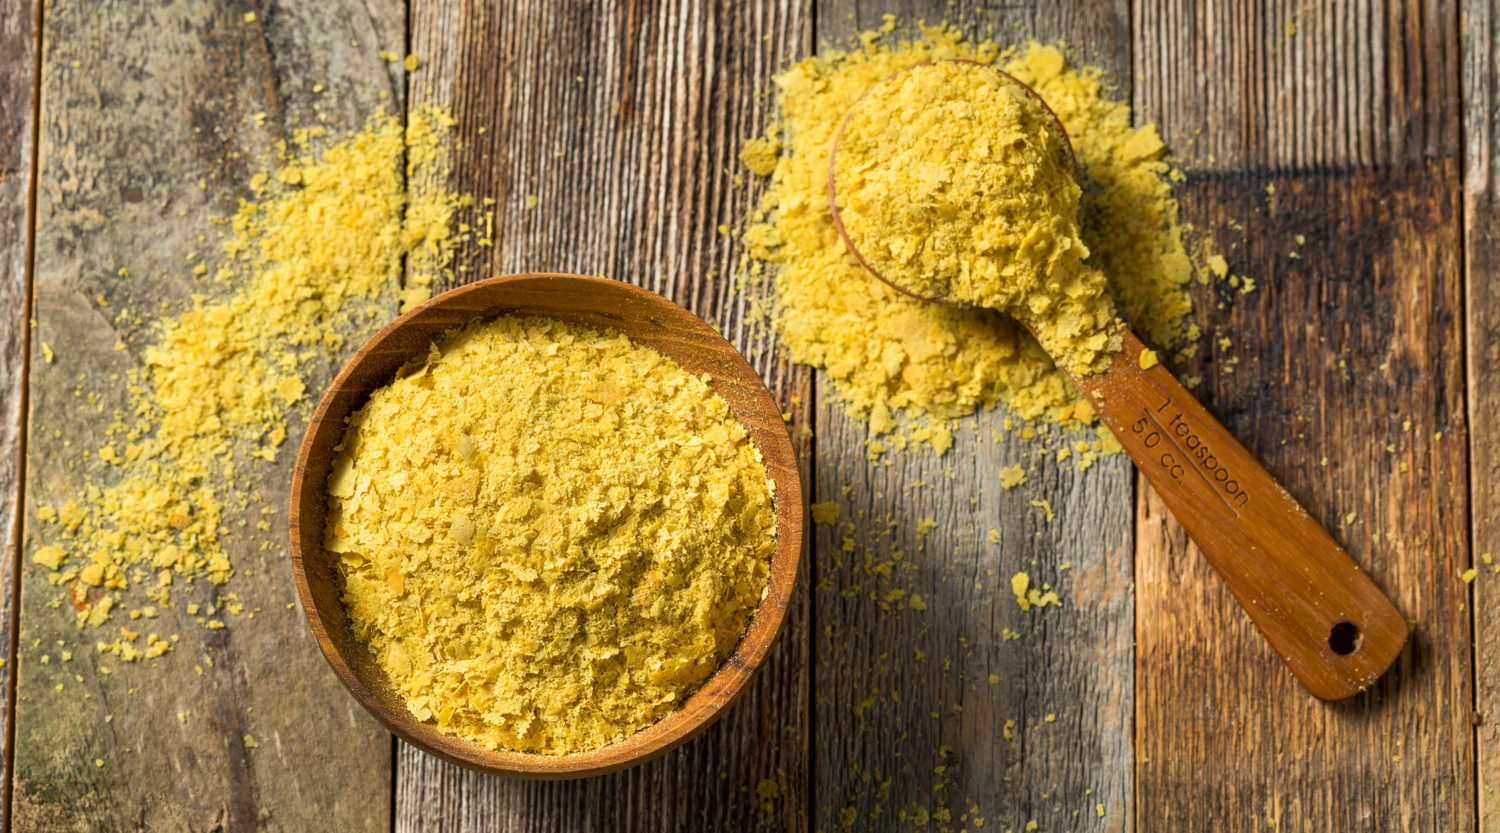 8 WAYS TO USE NUTRITIONAL YEAST AND ITS BENEFITS